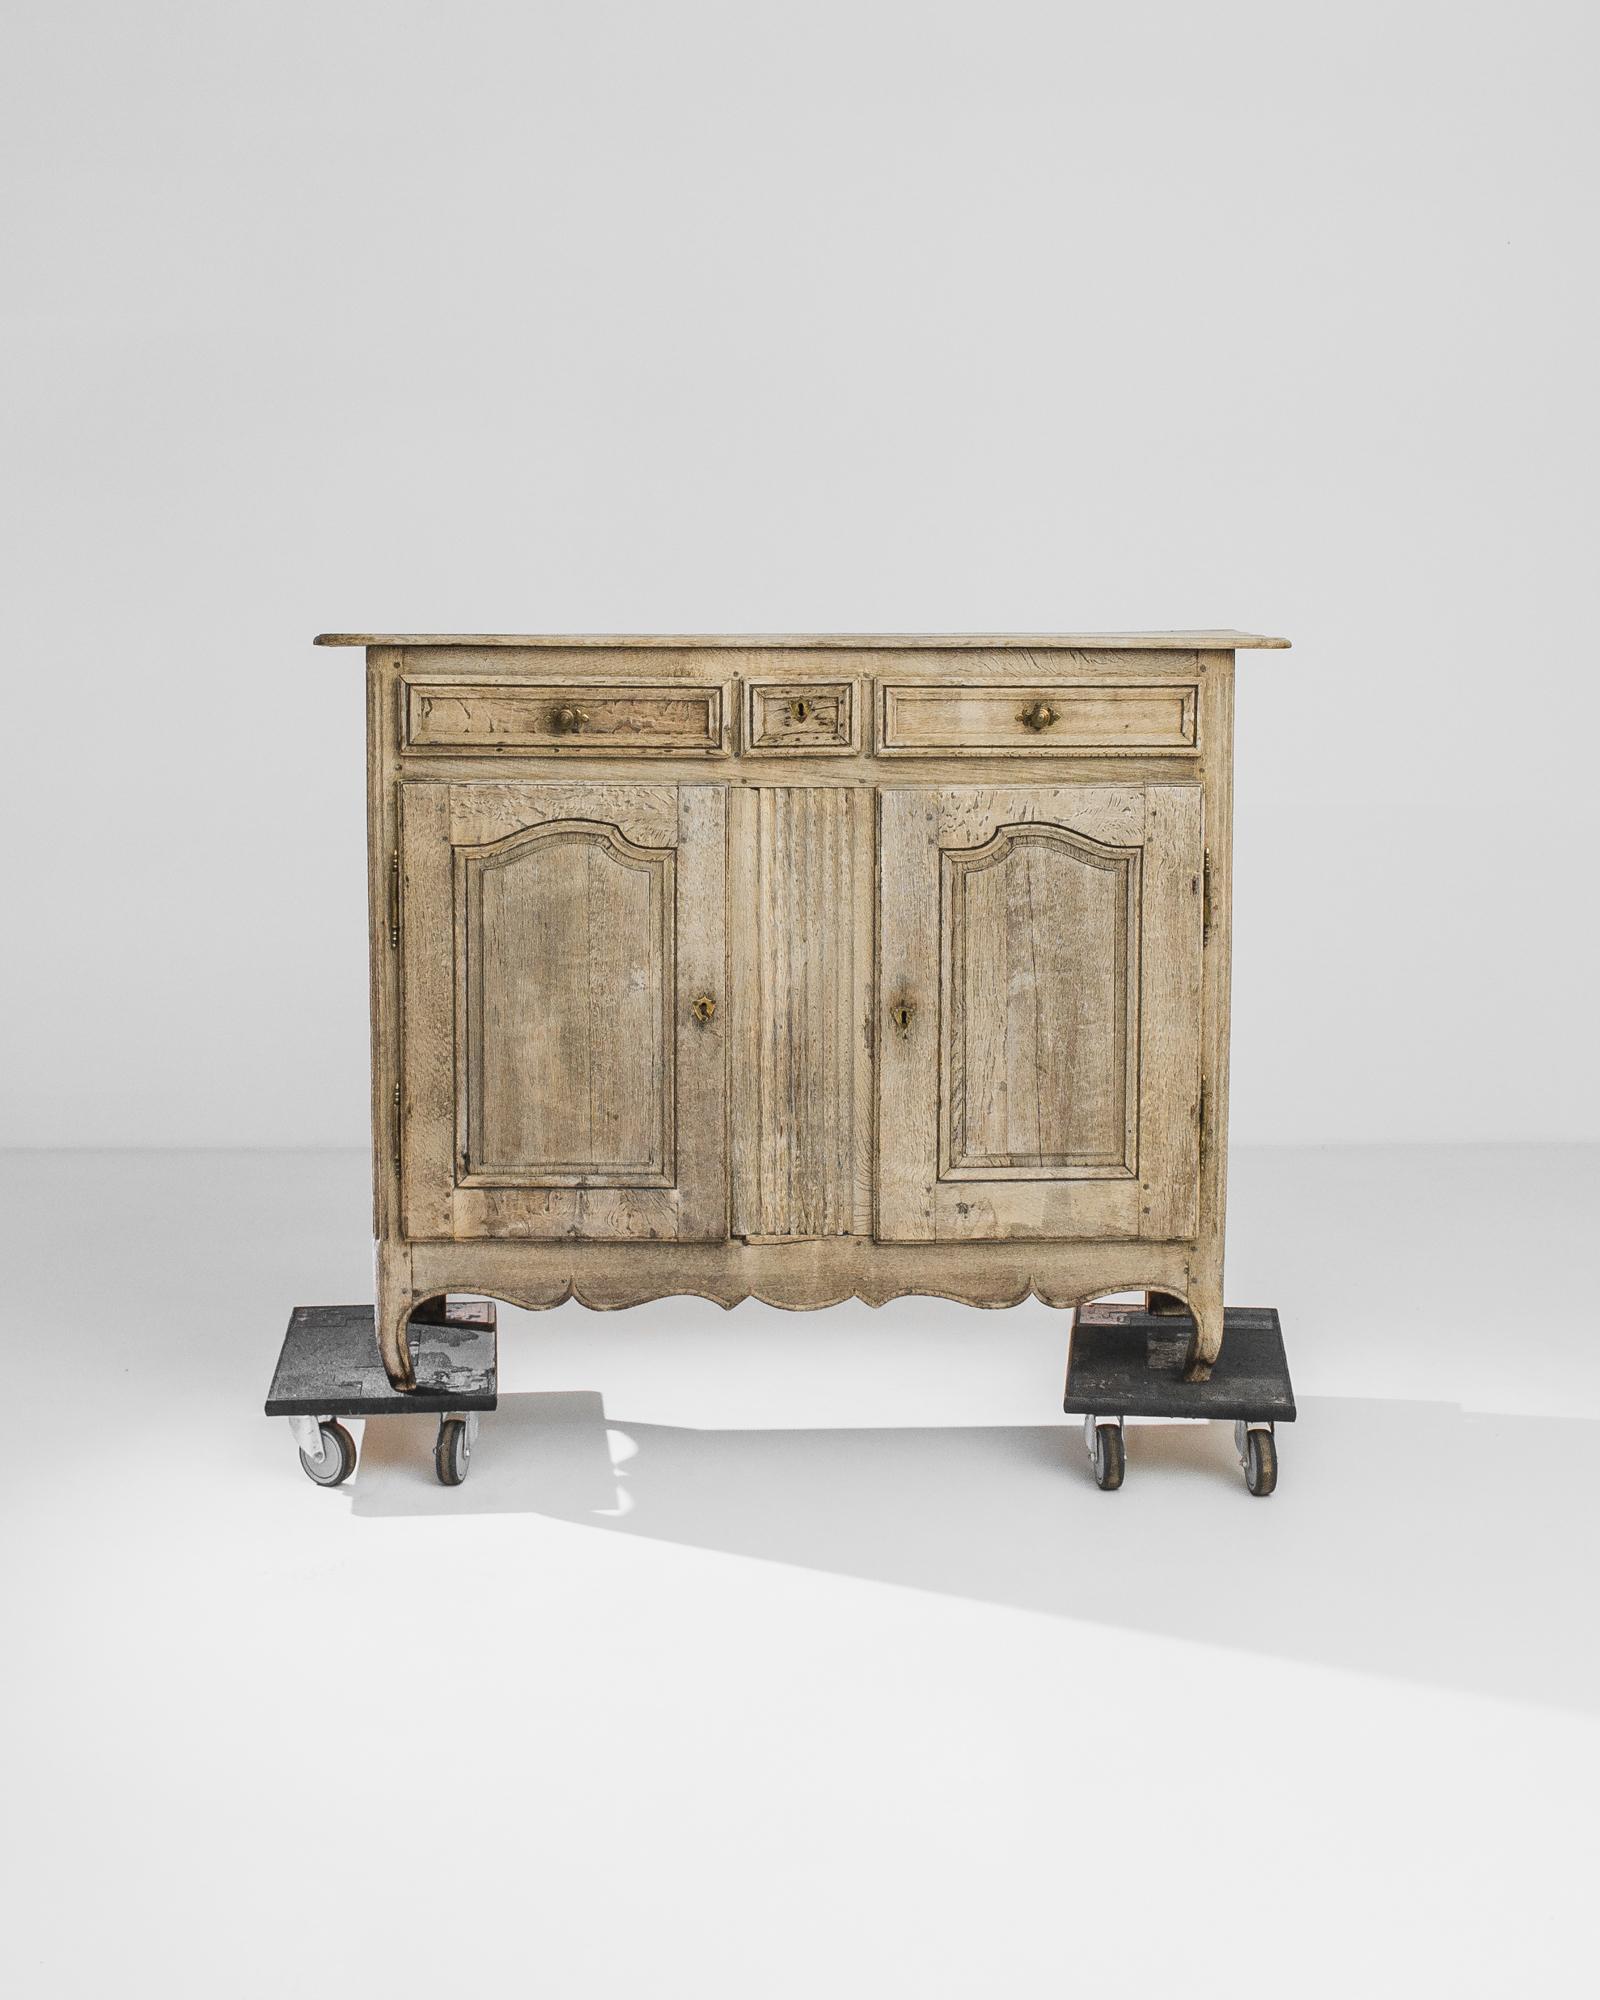 An oak buffet from 1860s France. Cabriole feet and a scalloped apron give an air of delicacy to the upright frame; original gilded drawer handles and a crest-shaped lock piece add a noble touch. The warm biscuit color of the restored wood lends a